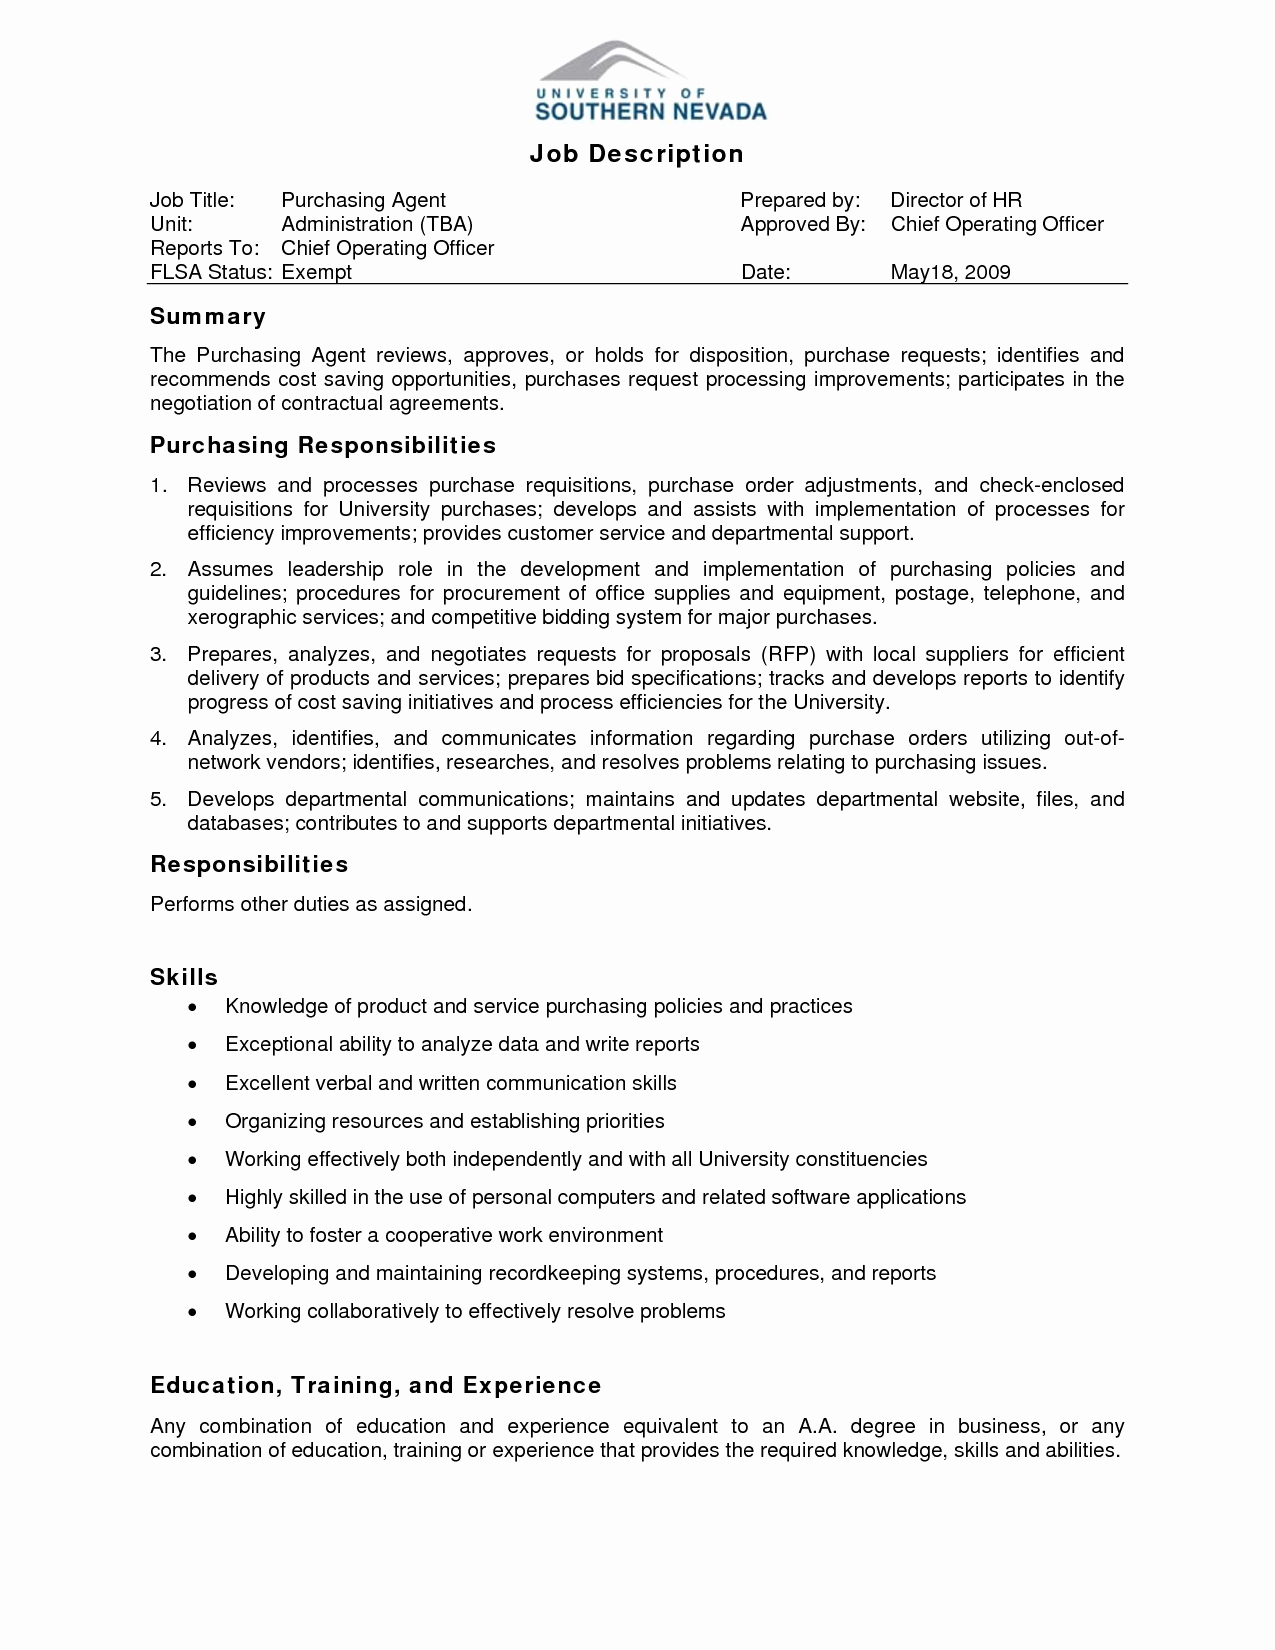 Administrative assistant Duties Cover Letter Job